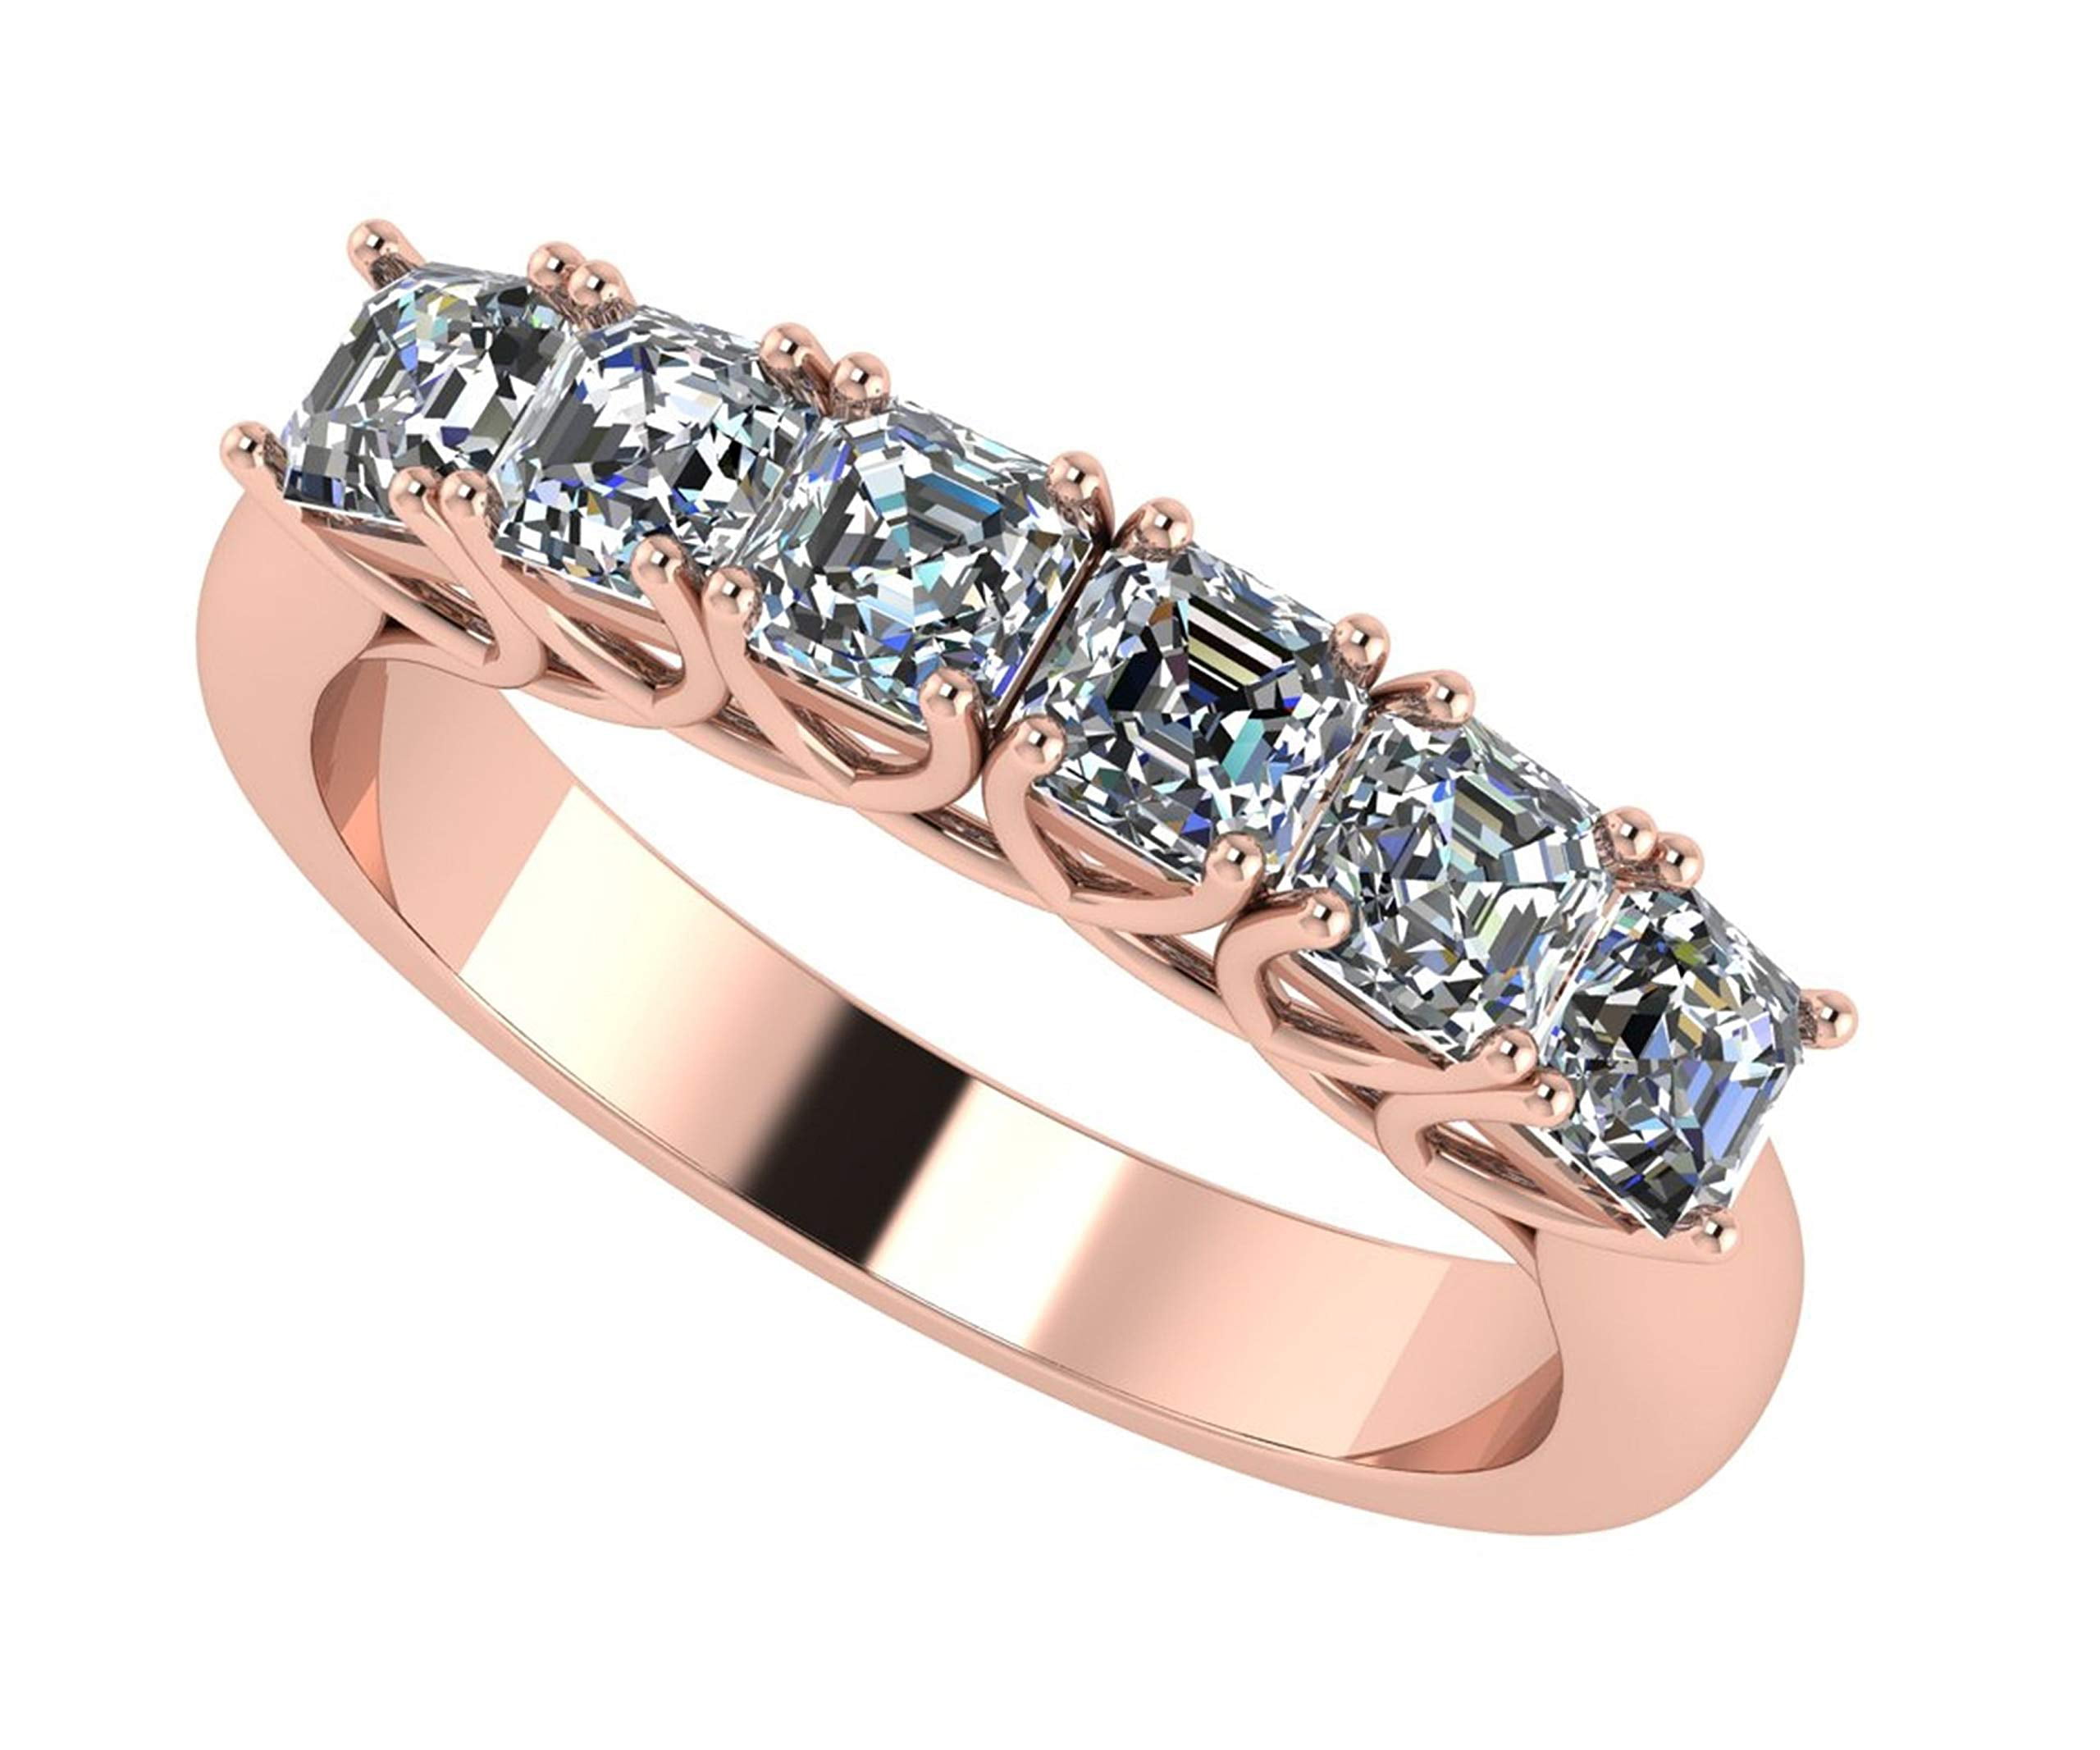 Details about  / 1.5ct Pear Cut Morganite Engagement Ring Diamond Accents Halo 14k Rose Gold Over